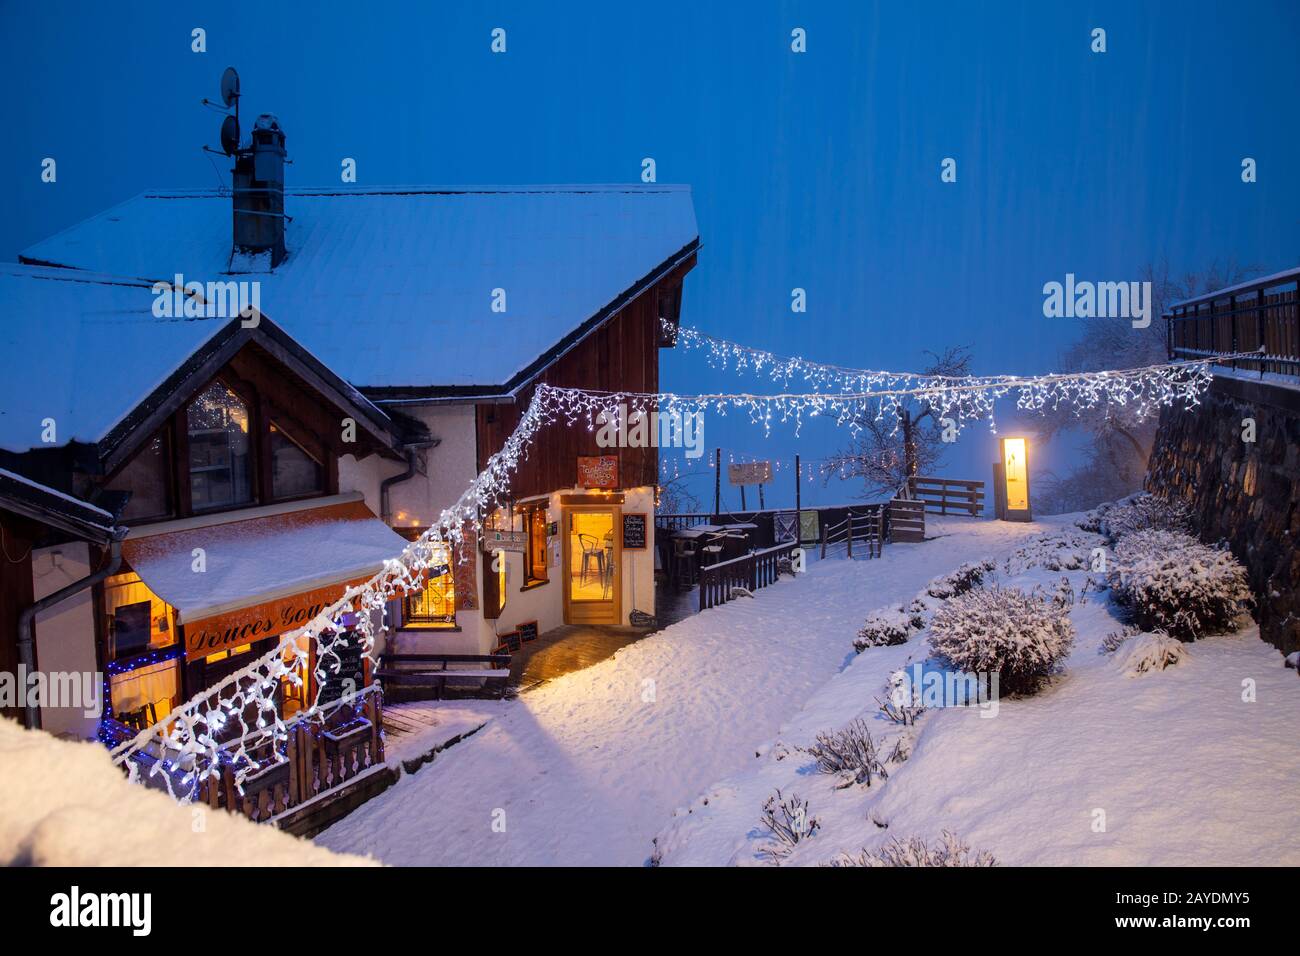 VENOSC, FRANCE  - 17th JANUARY 2020; Venosc is an old mountain village appreciated for its traditional charm and craft shops. Stock Photo